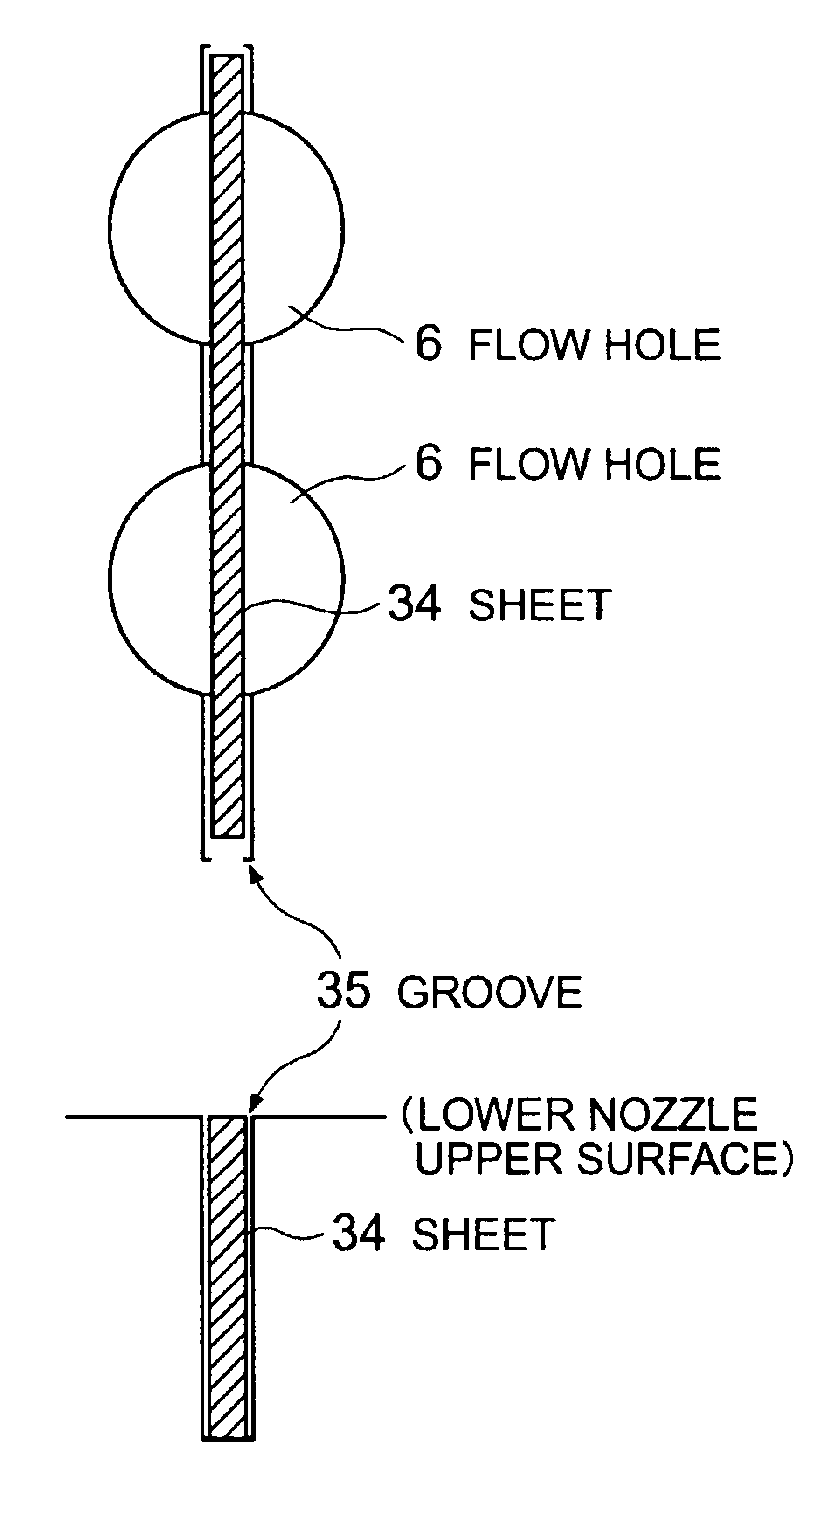 Foreign matter filter for fuel assembly in pressurized water reactor